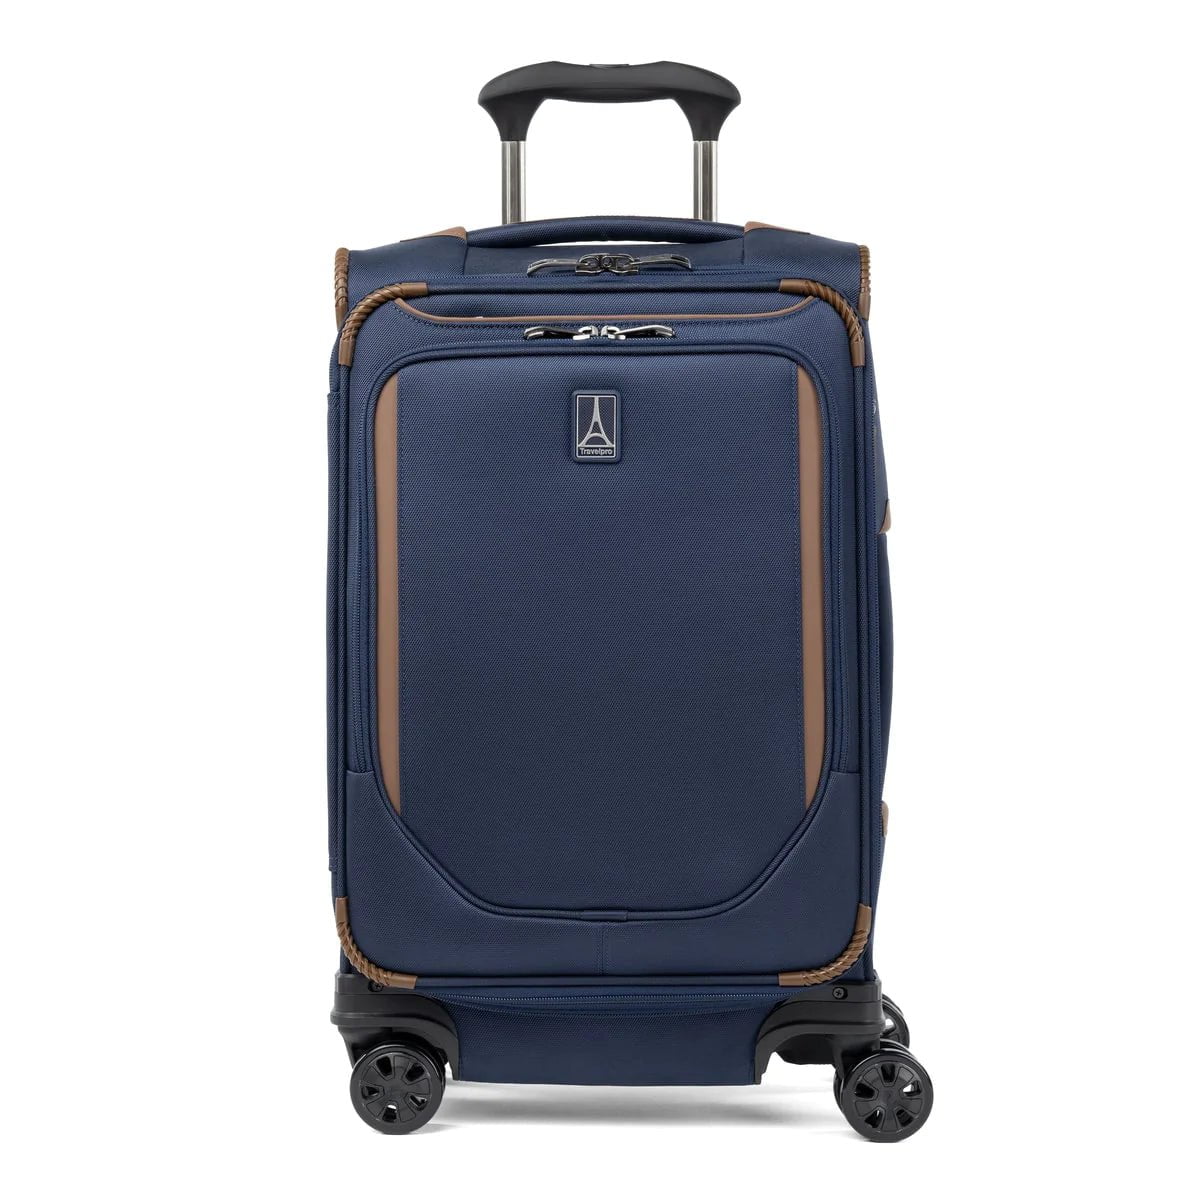 Travelpro Crew Classic Carry-On Expandable Spinner Luggage Patriot Blue